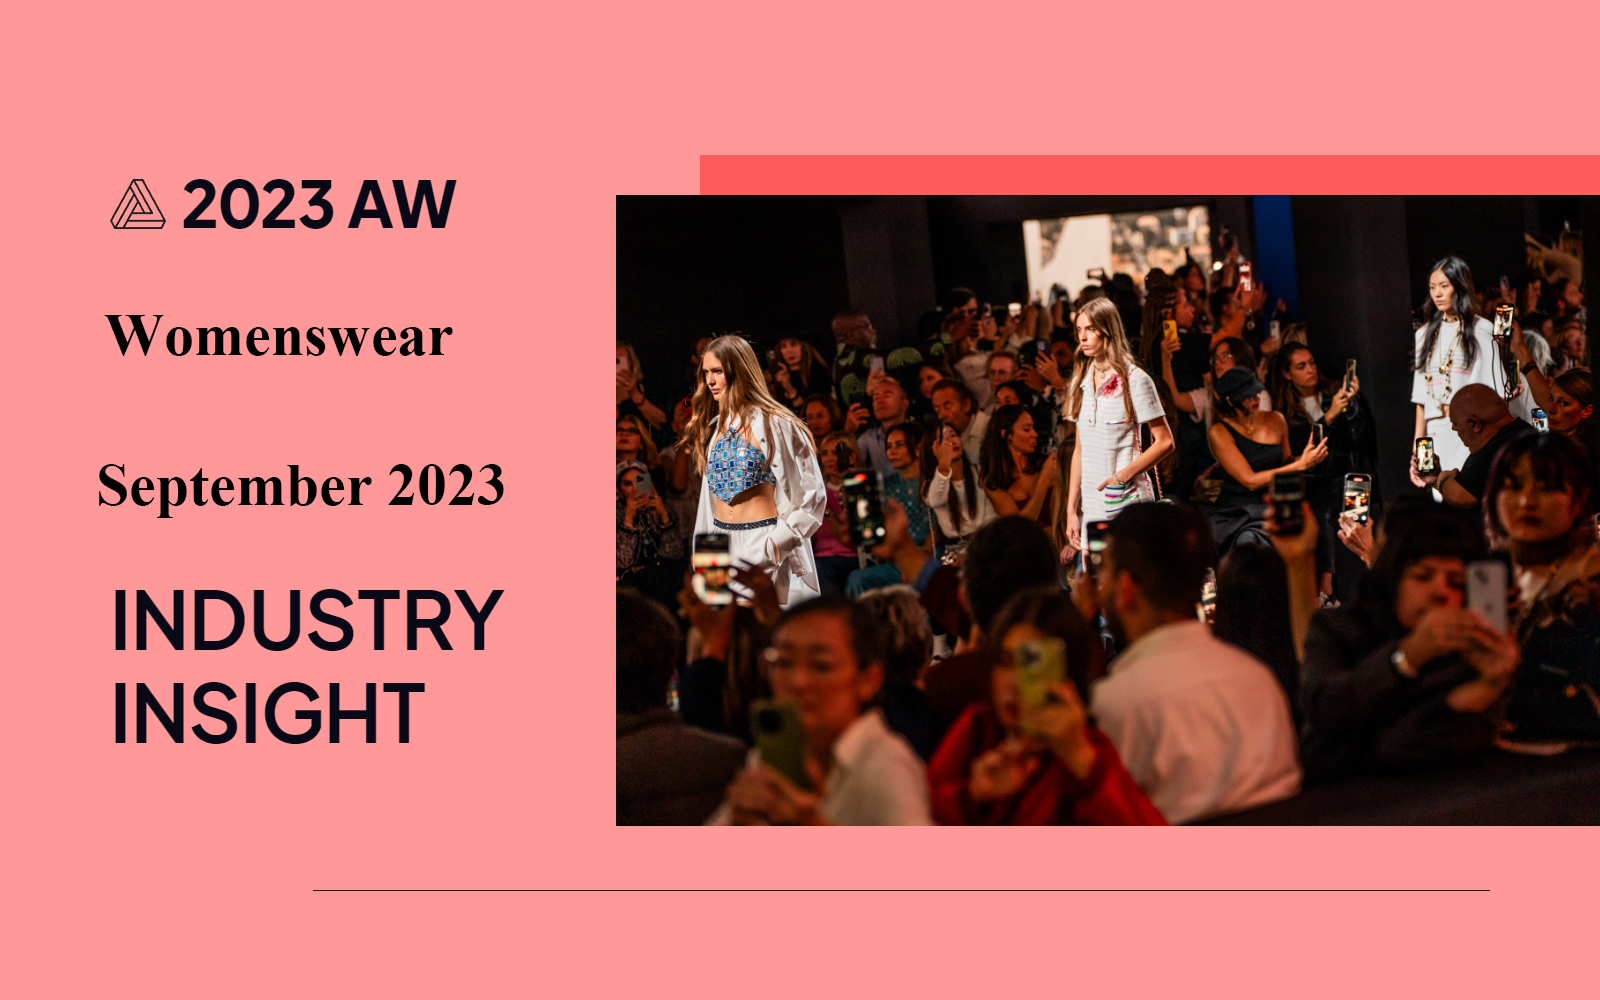 September 2023 -- The Industry Insight of Womenswear